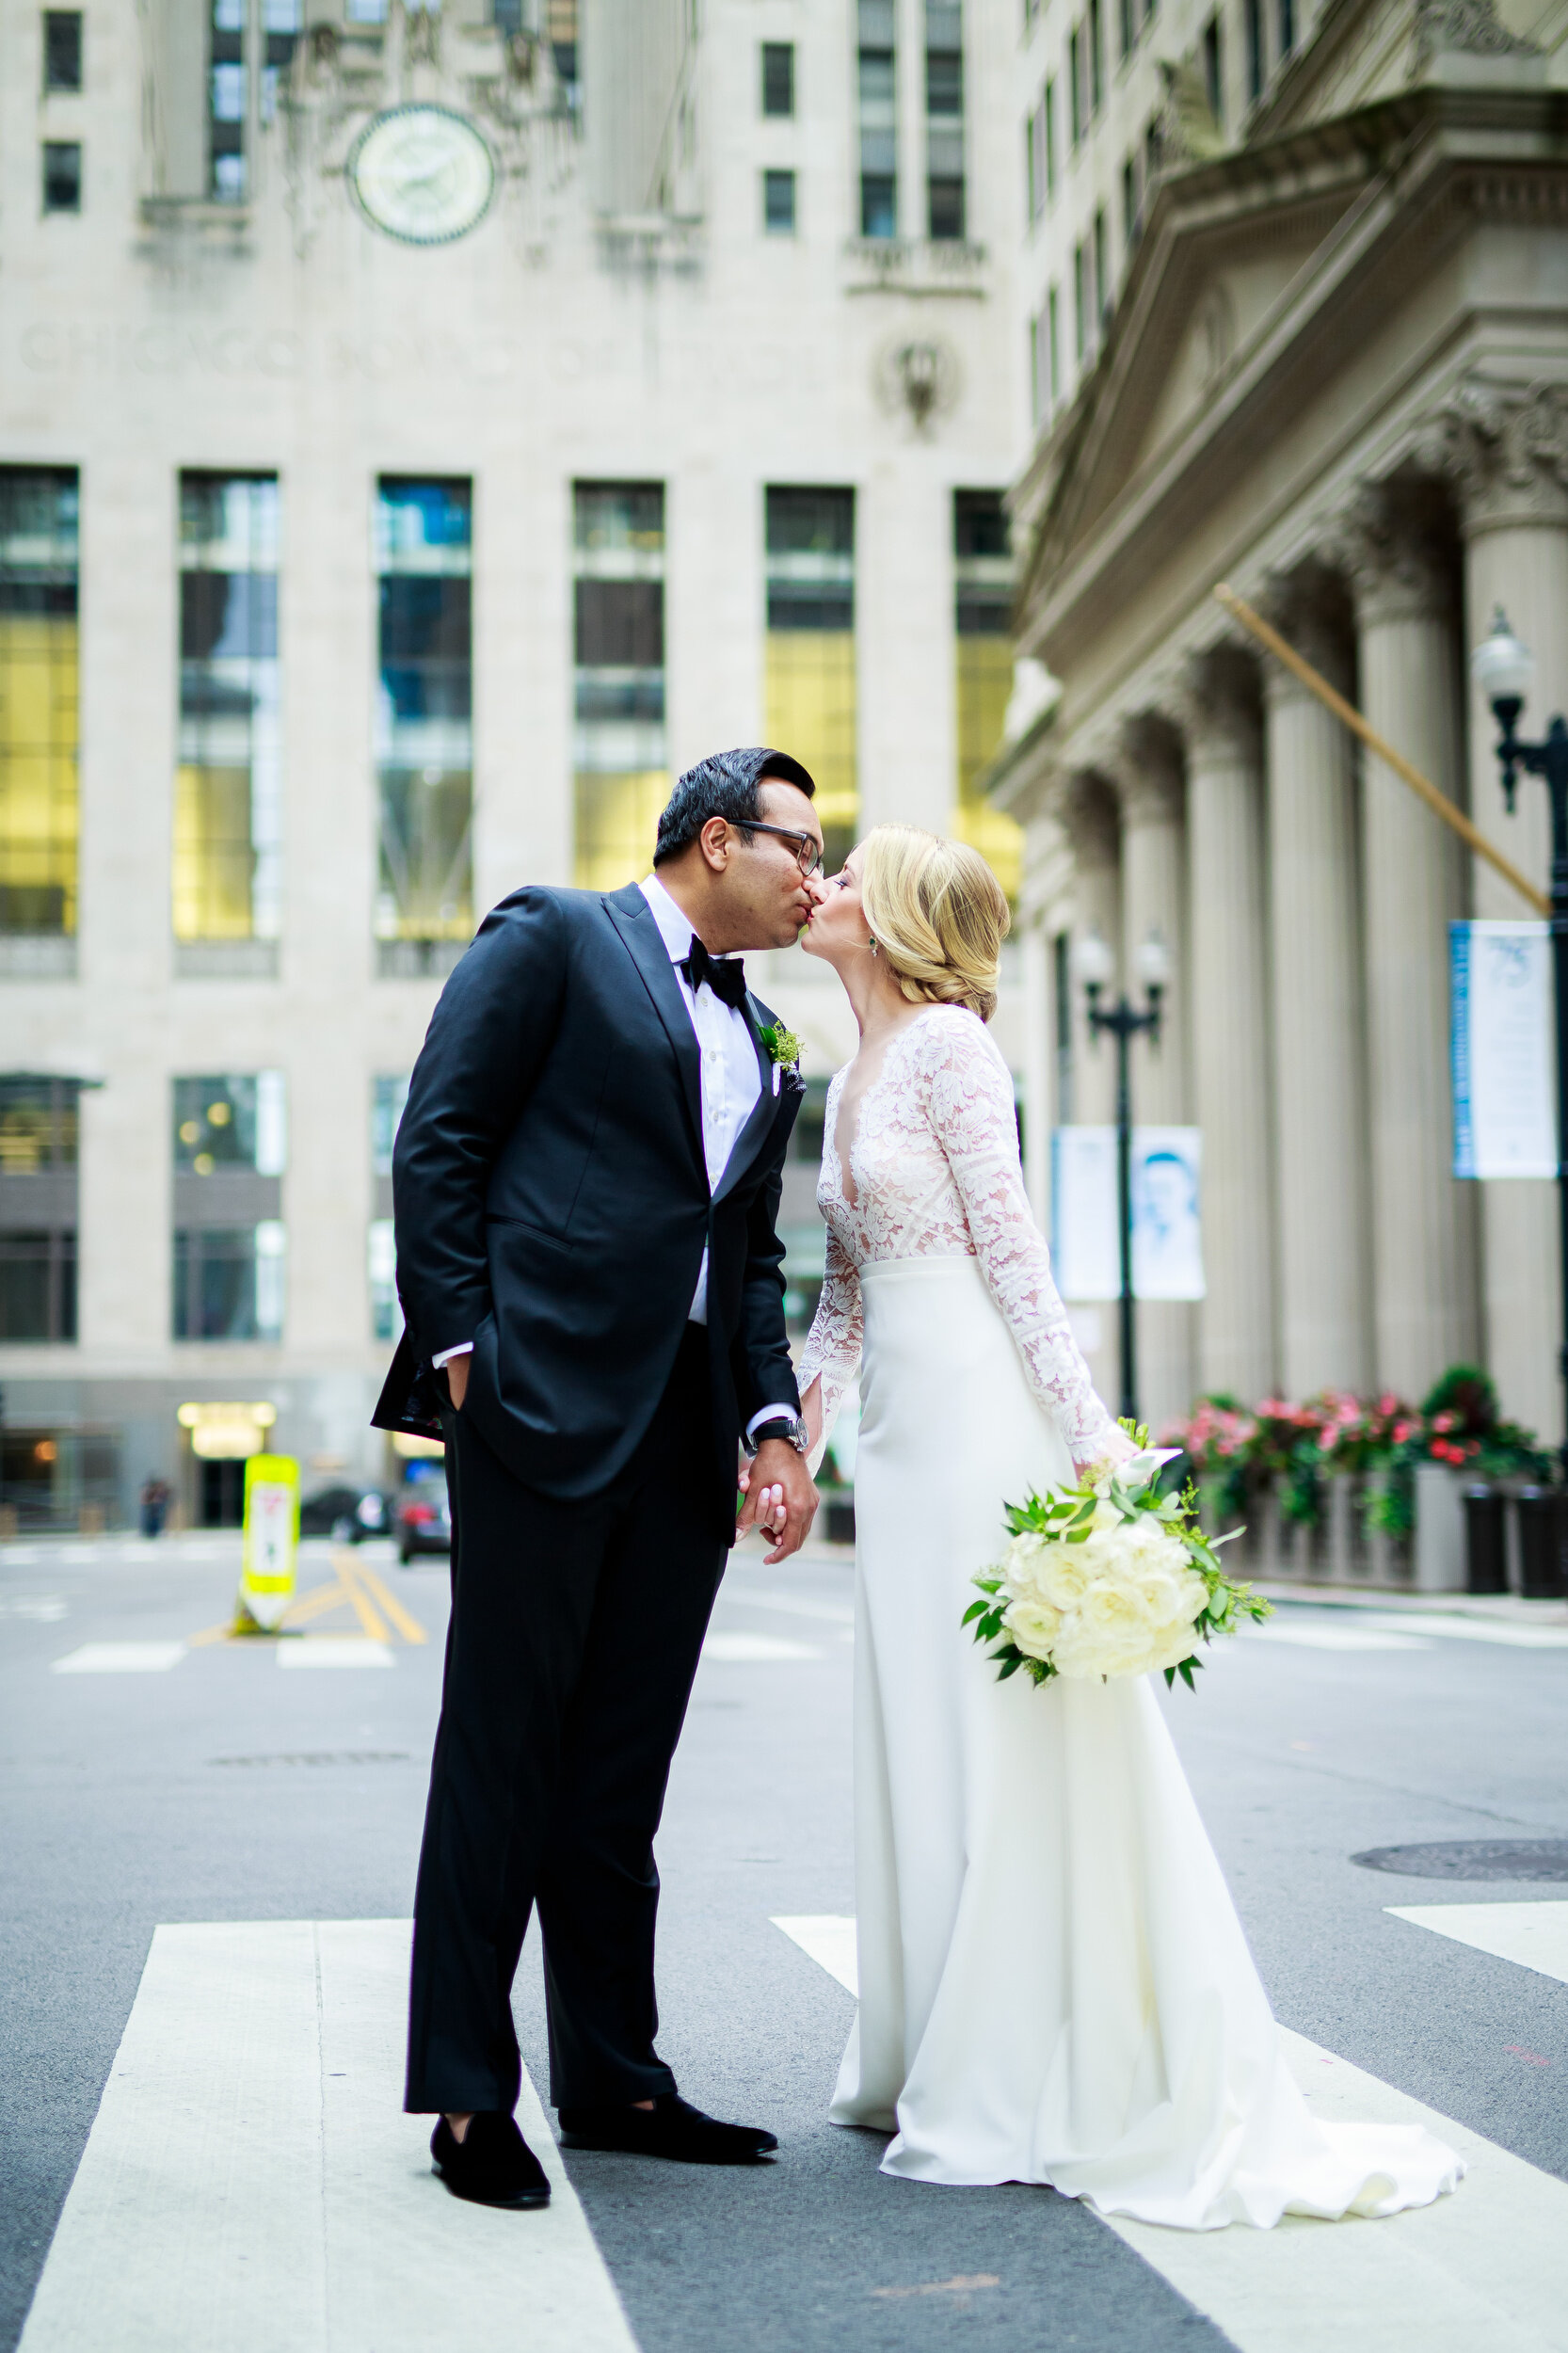 Bride and groom photo outside the Board of Trade: Geraghty Chicago wedding photography captured by J. Brown Photography.